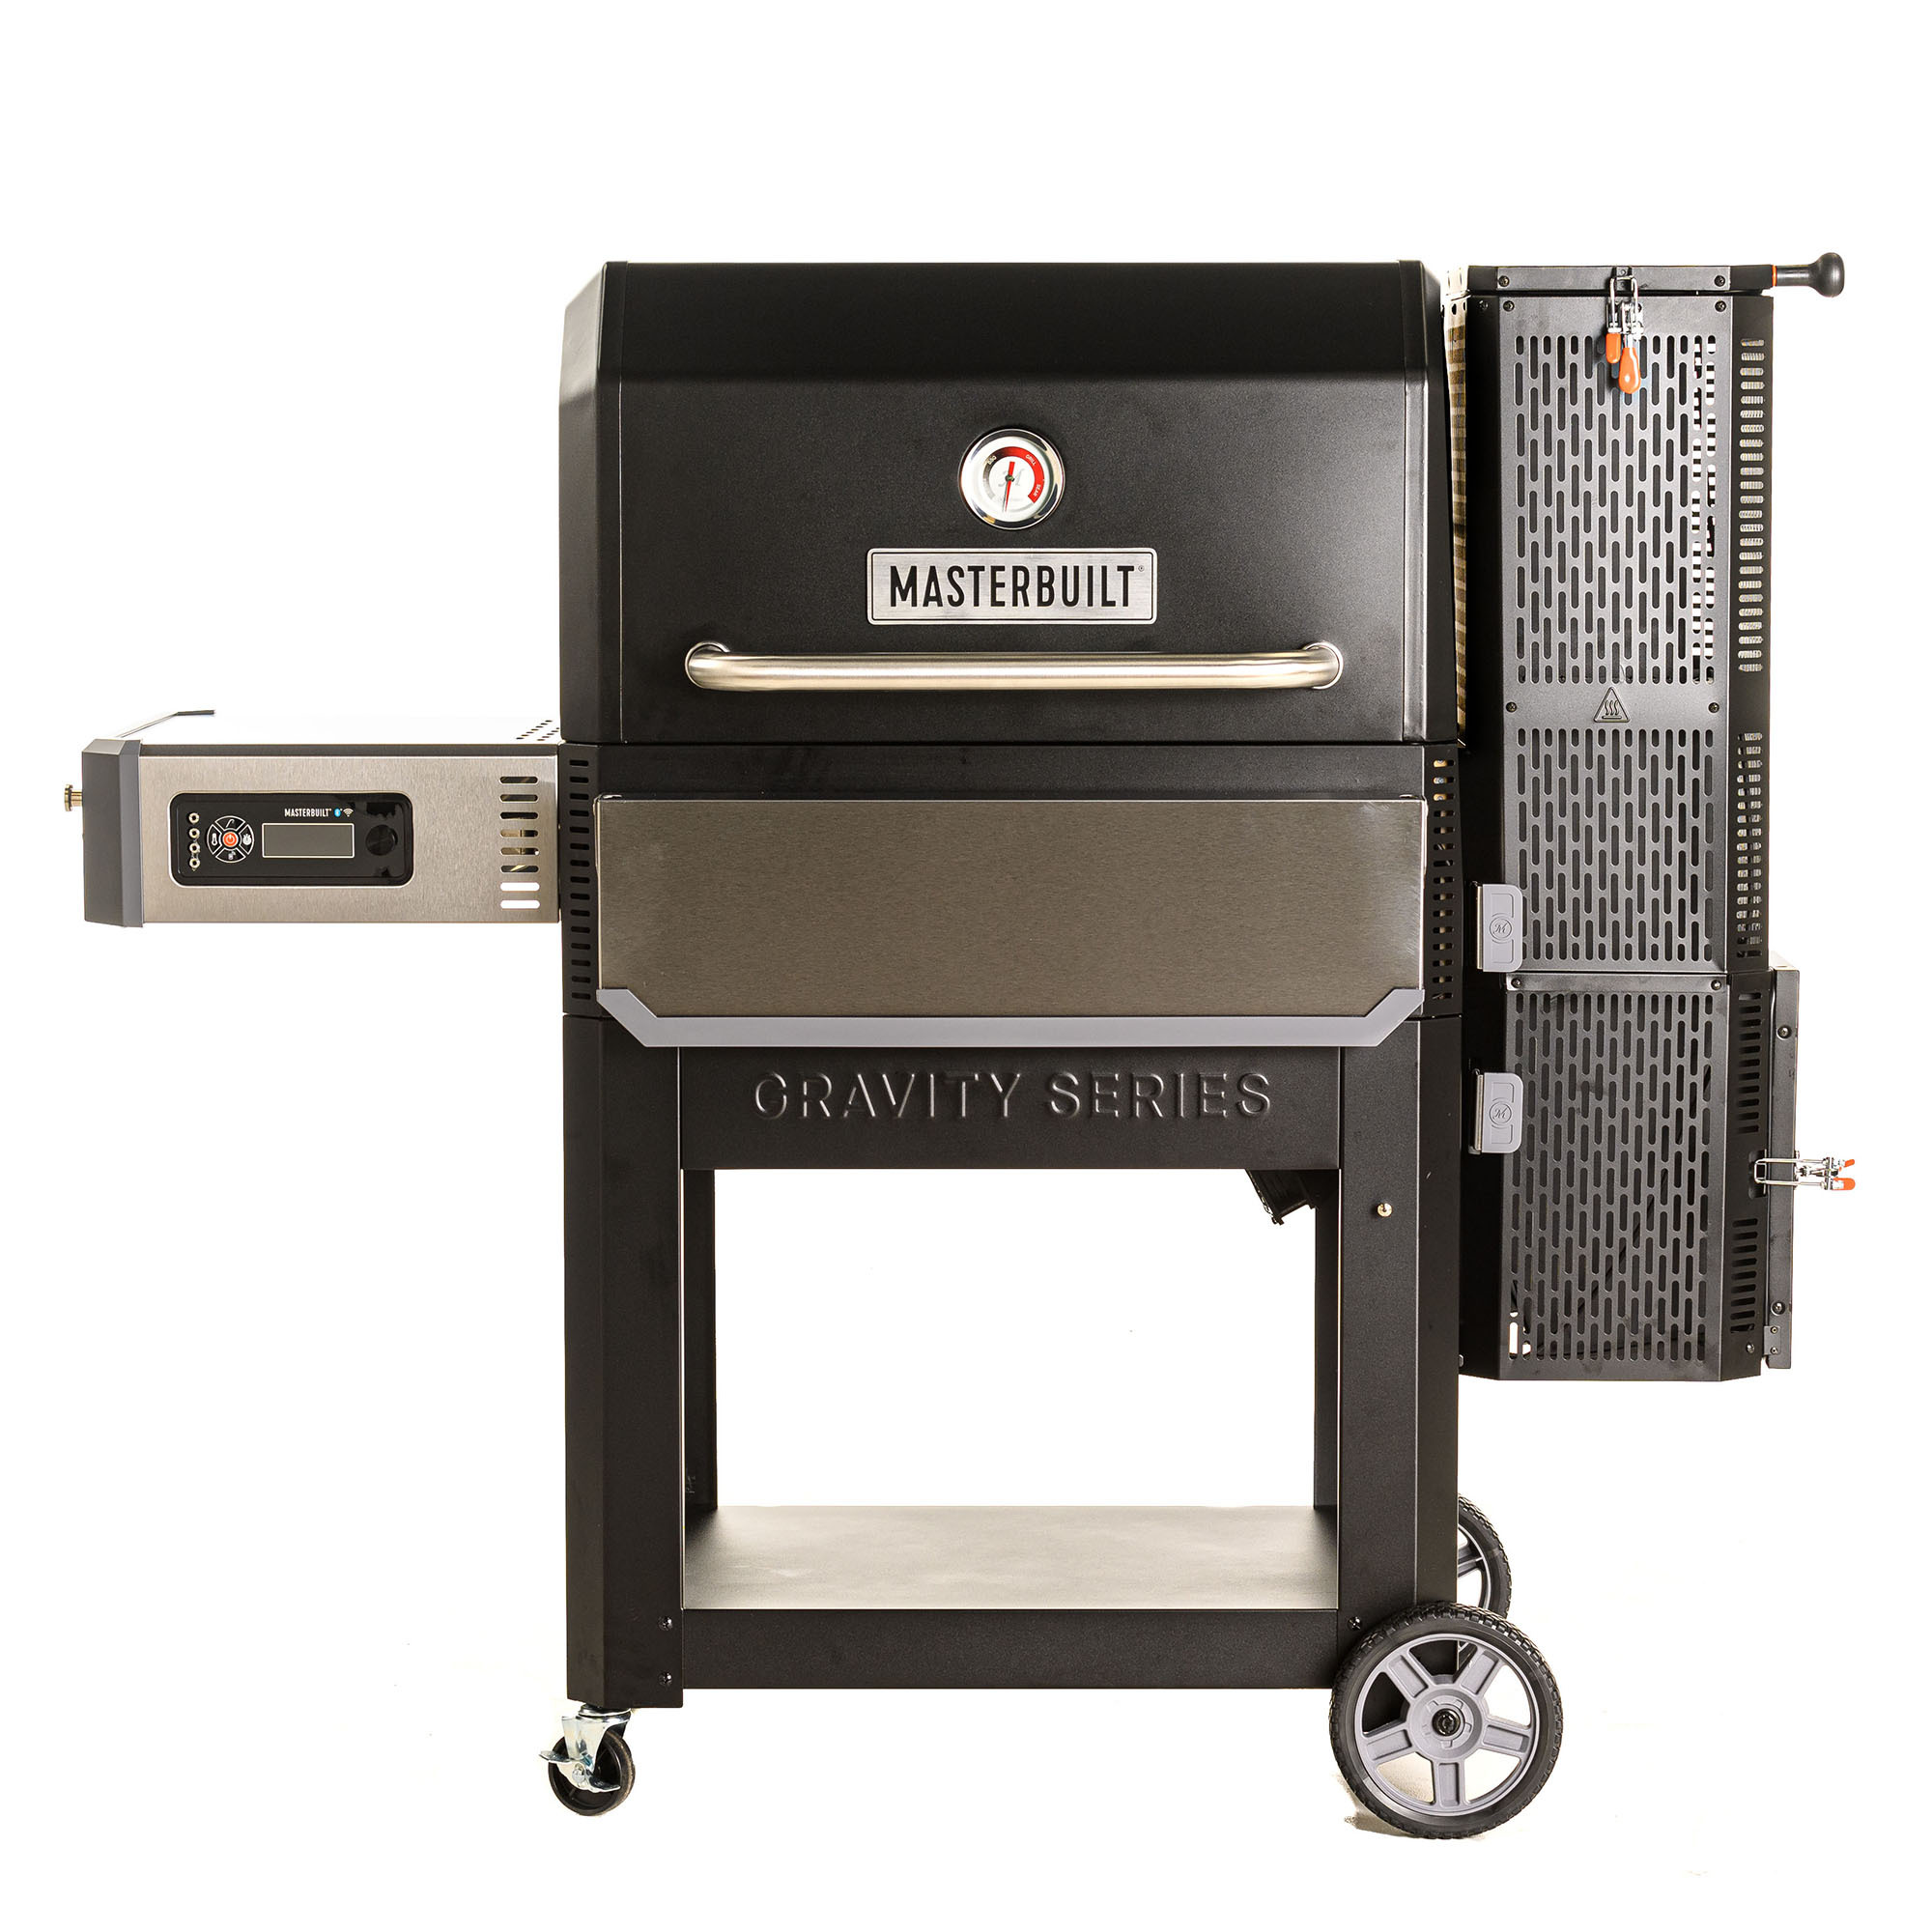 Gravity Series 1050 Digital Charcoal Grill + Smoker - image 1 of 11